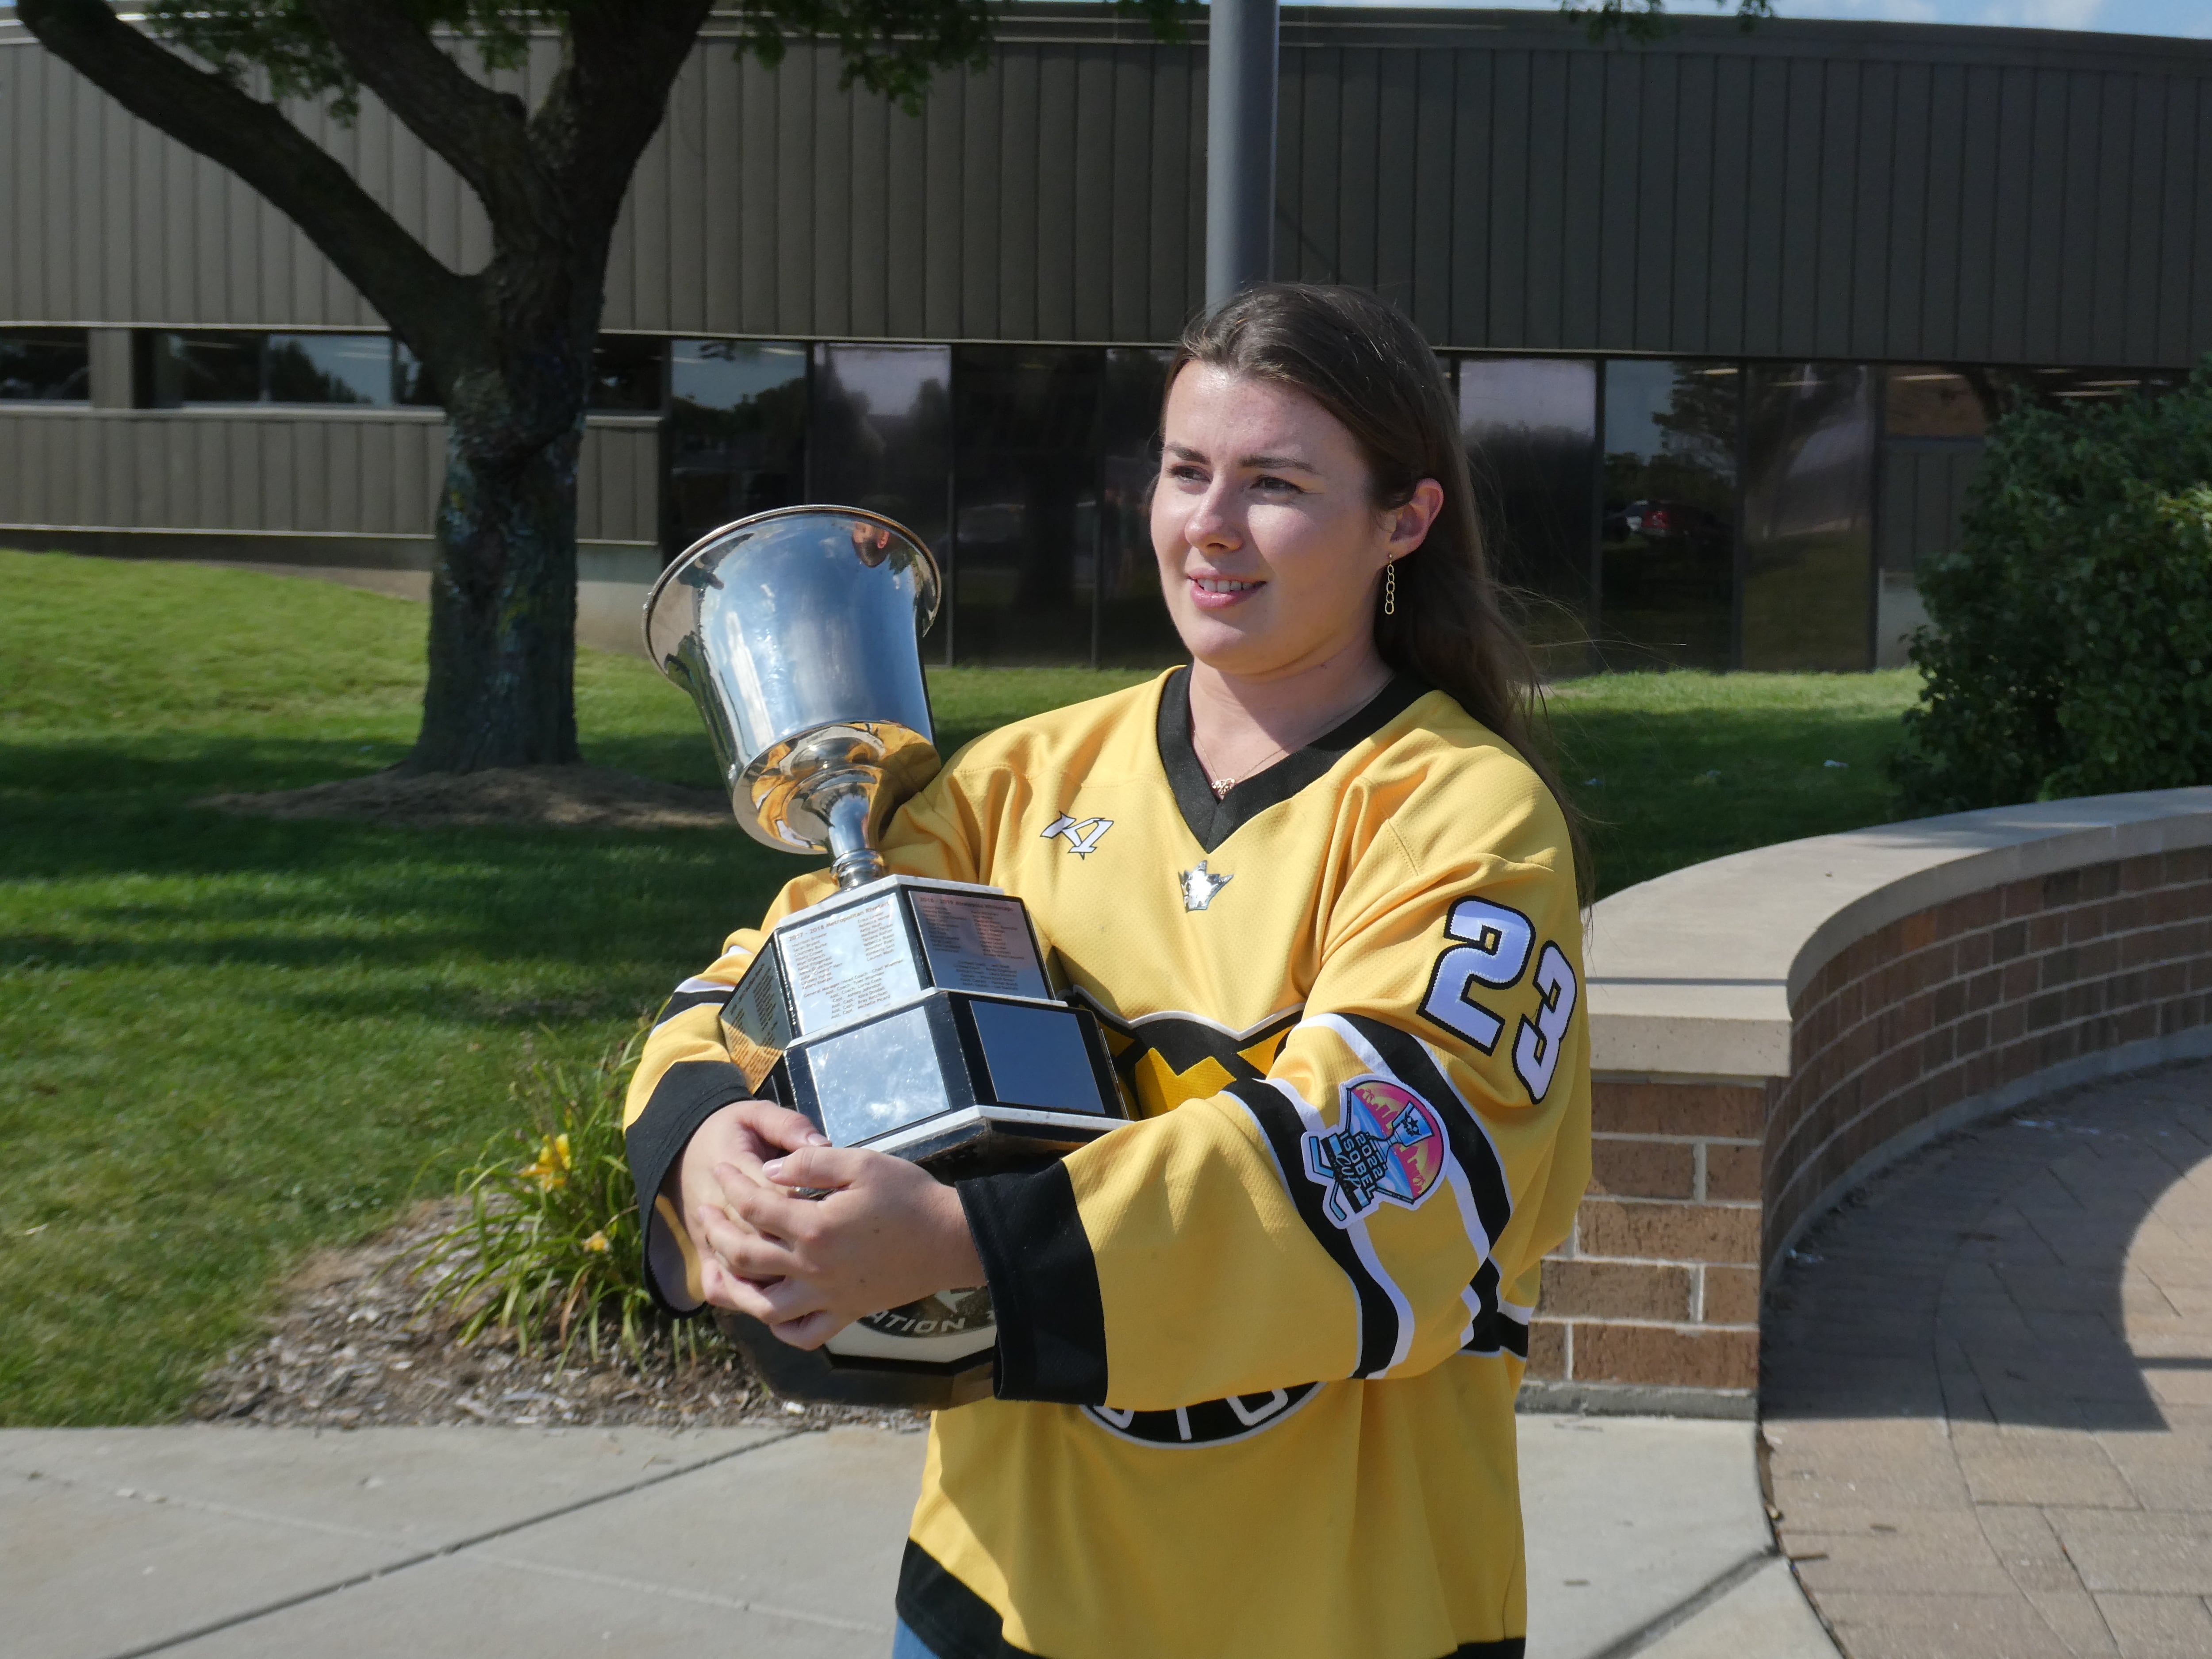 Hockey champion Katelynn Russ brings Isobel Cup trophy home to Crystal Lake